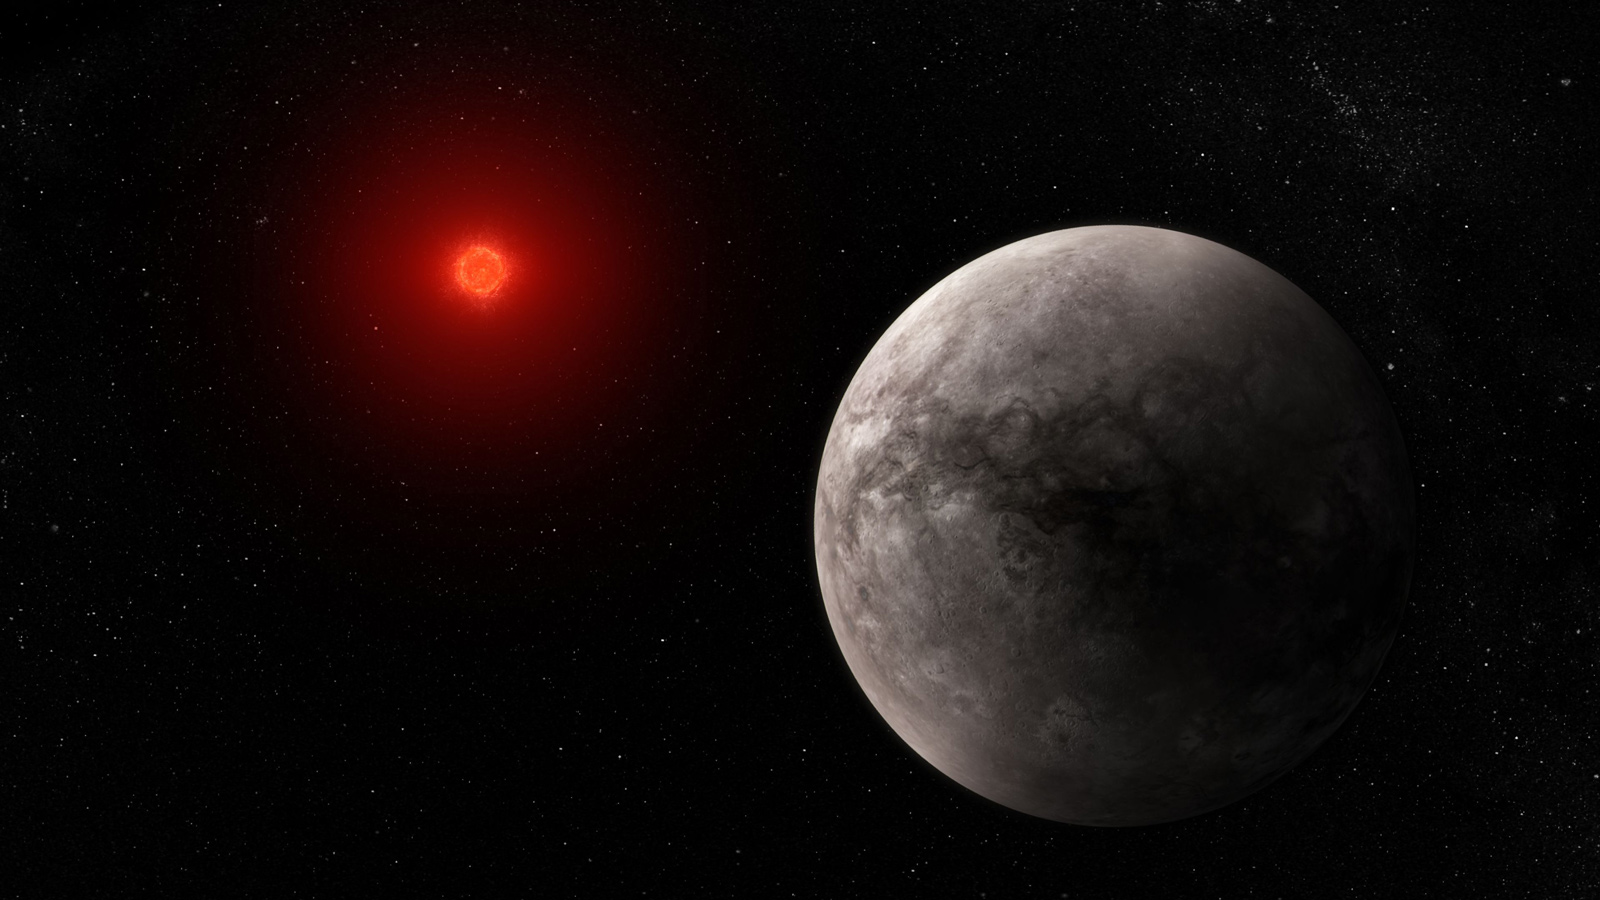 James Webb first measured the temperature of an earth-like planet in the TRAPPIST-1 star system, but found no atmosphere